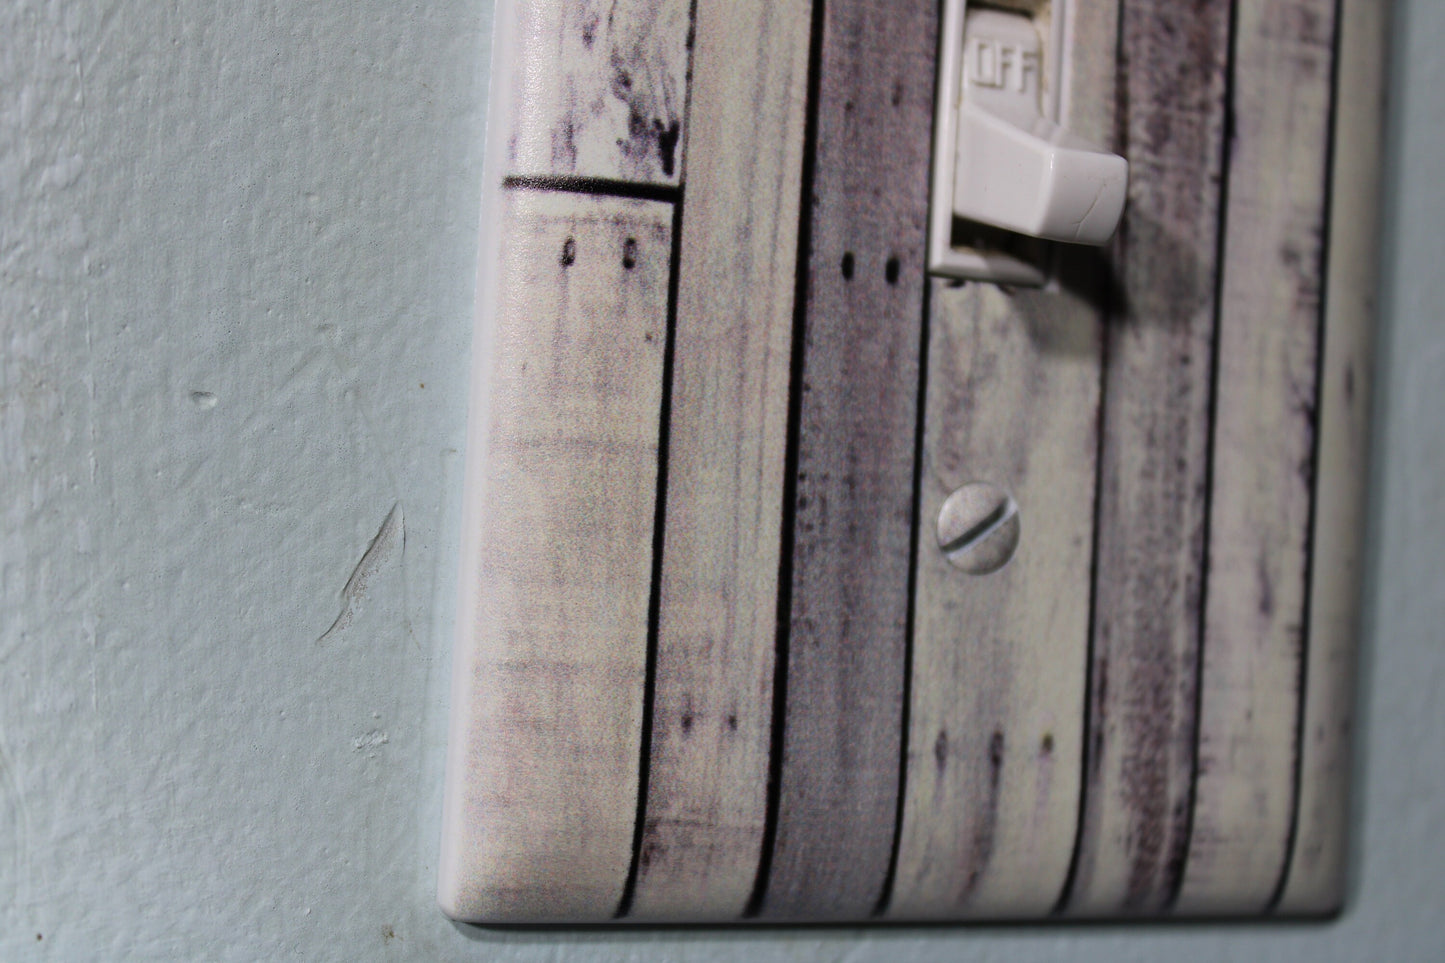 Rustic whitewashed pallet wood nails with warn painted paint chips light switch cover plate farmhouse decor